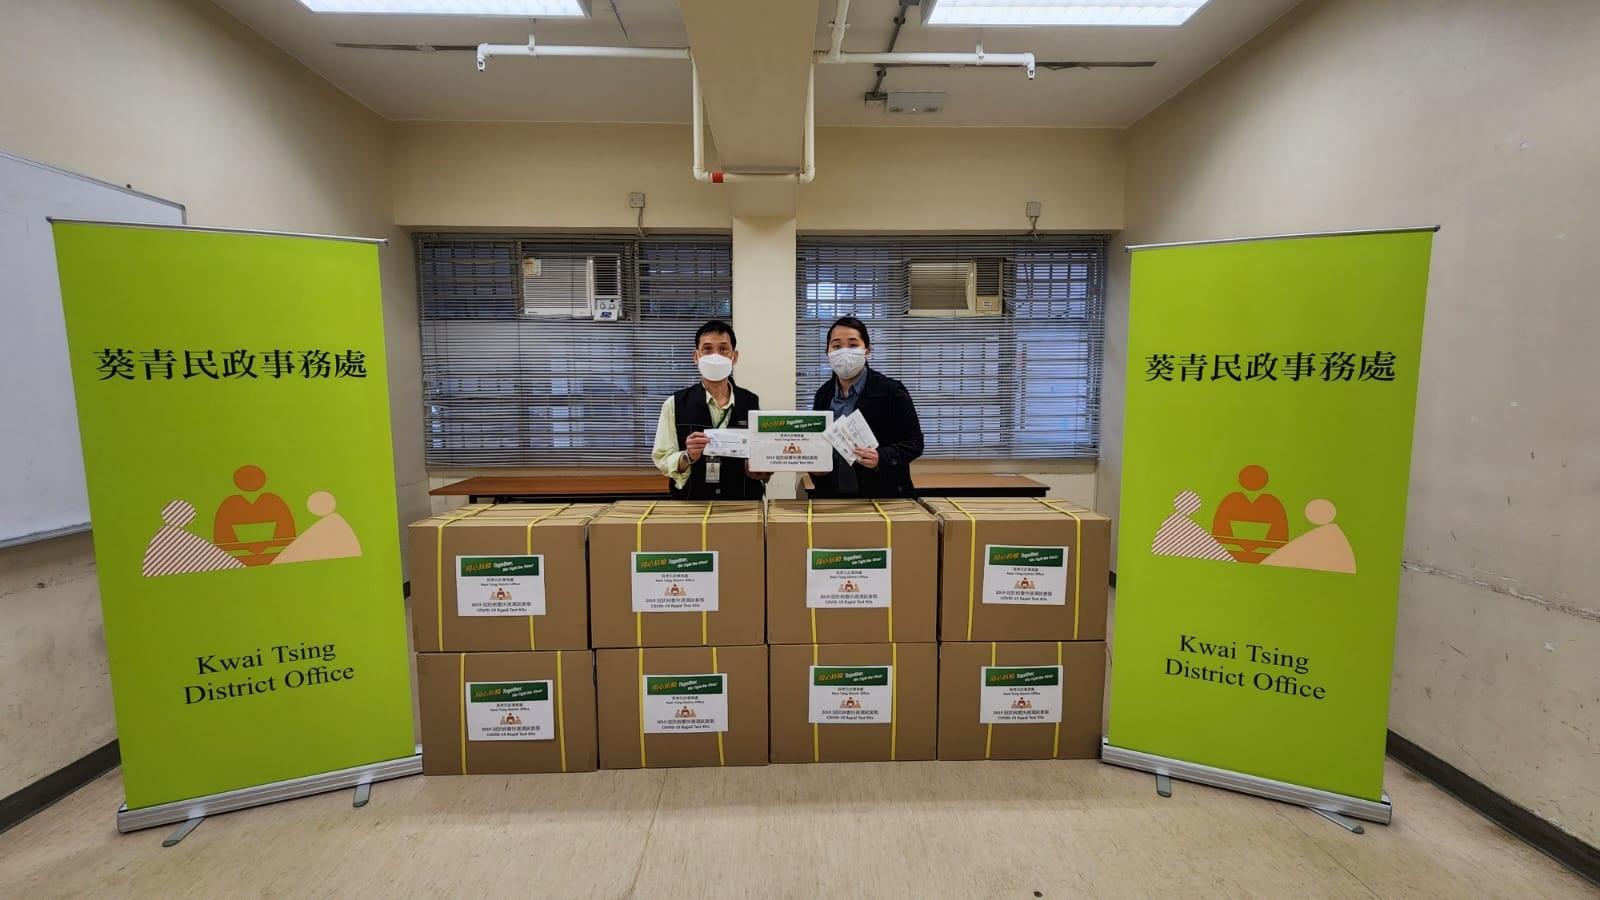 The Kwai Tsing District Office today (March 28) distributed COVID-19 rapid test kits to households, cleansing workers and property management staff living and working in Greenfield Garden for voluntary testing through the property management company.